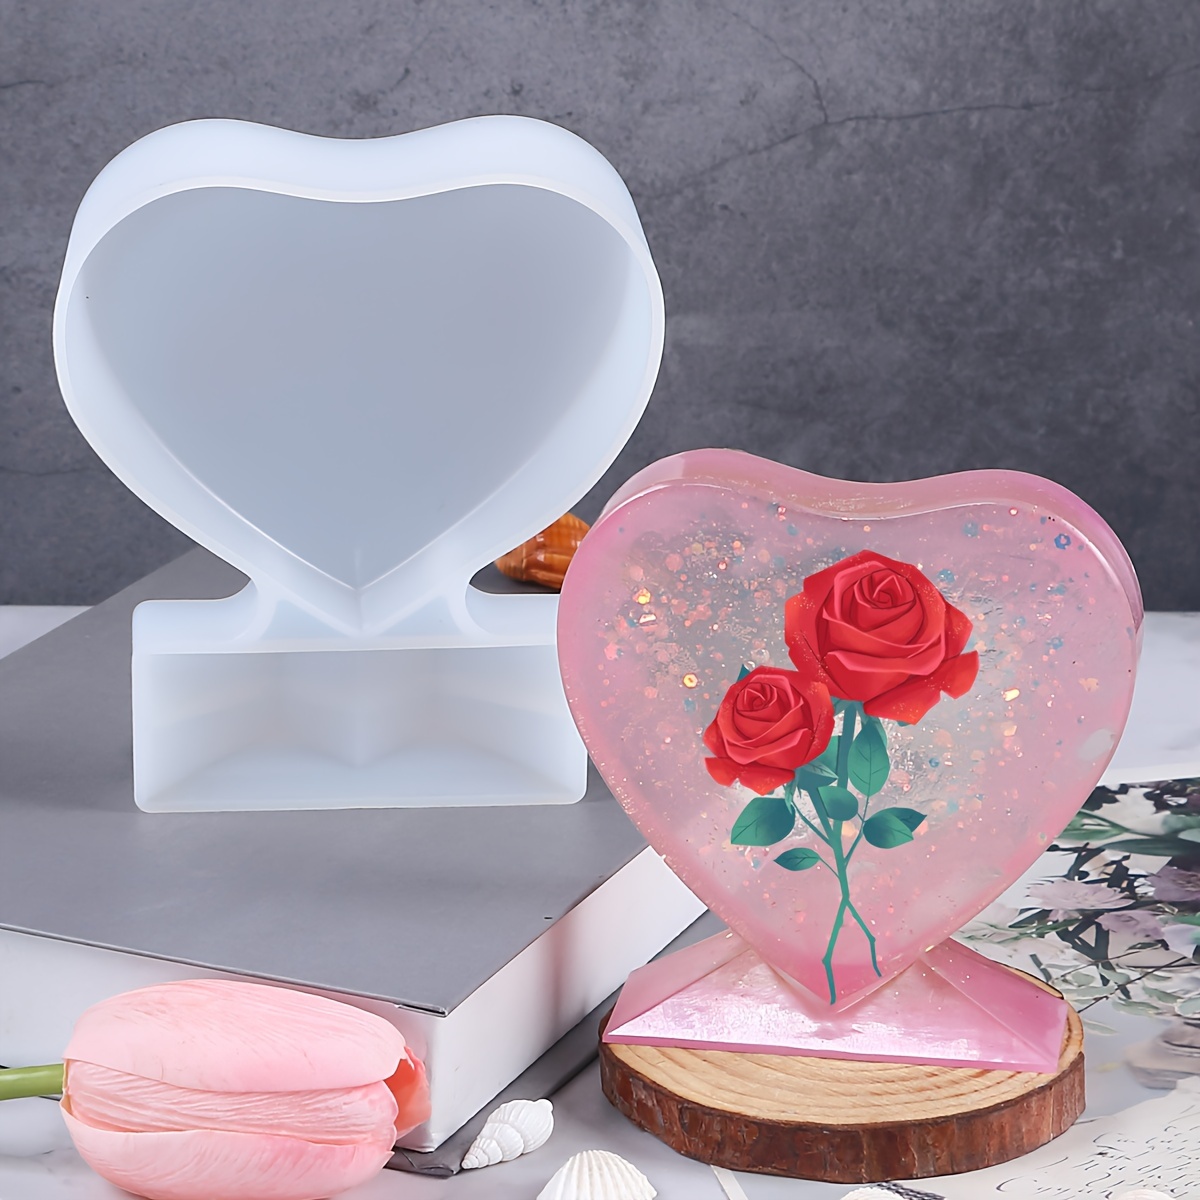 Resin Photo Frame Mold Silicone Picture Frames Resin Mold Love Heart Shape  Silicone Epoxy Mold - Silicone Molds Wholesale & Retail - Fondant, Soap,  Candy, DIY Cake Molds